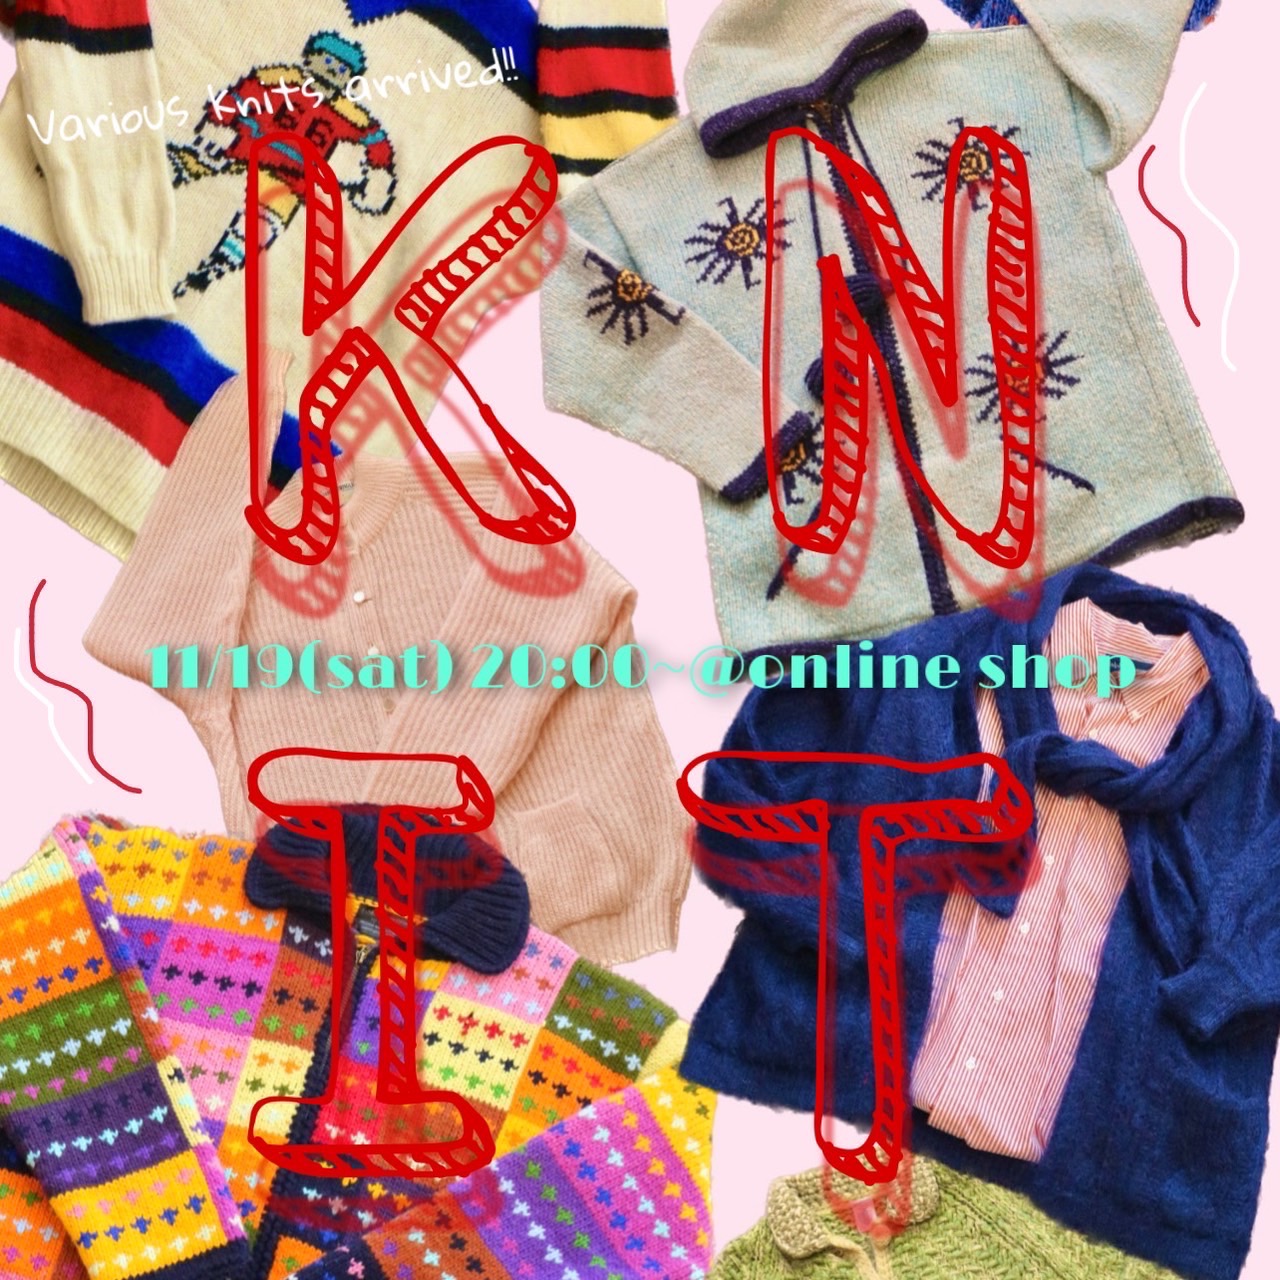 knit collection vol.2!